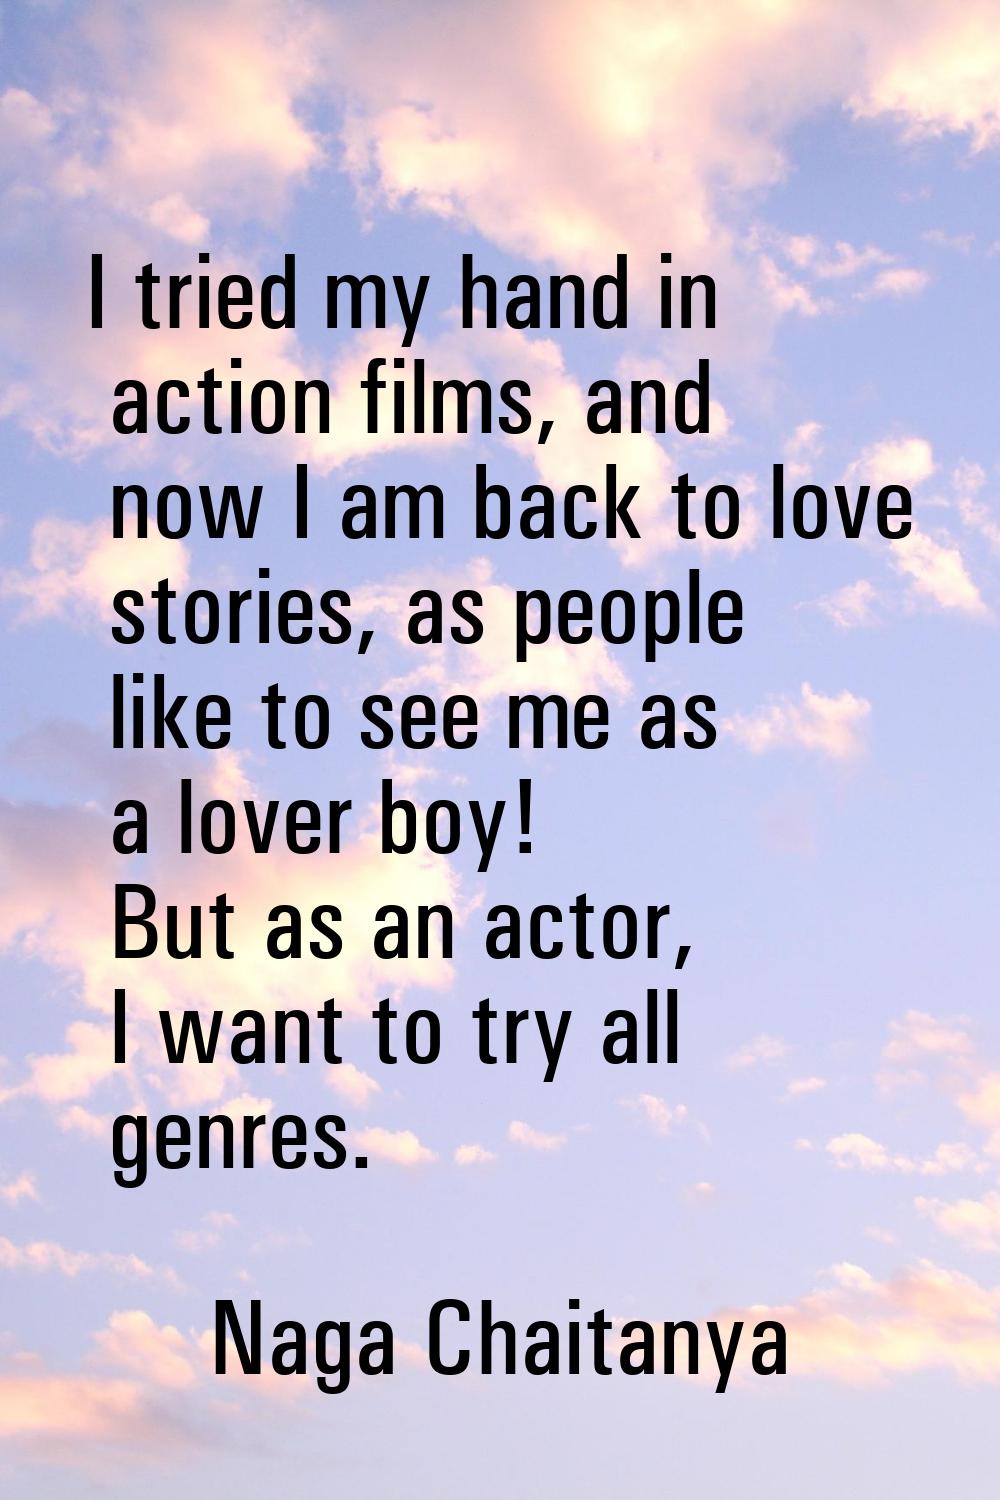 I tried my hand in action films, and now I am back to love stories, as people like to see me as a l